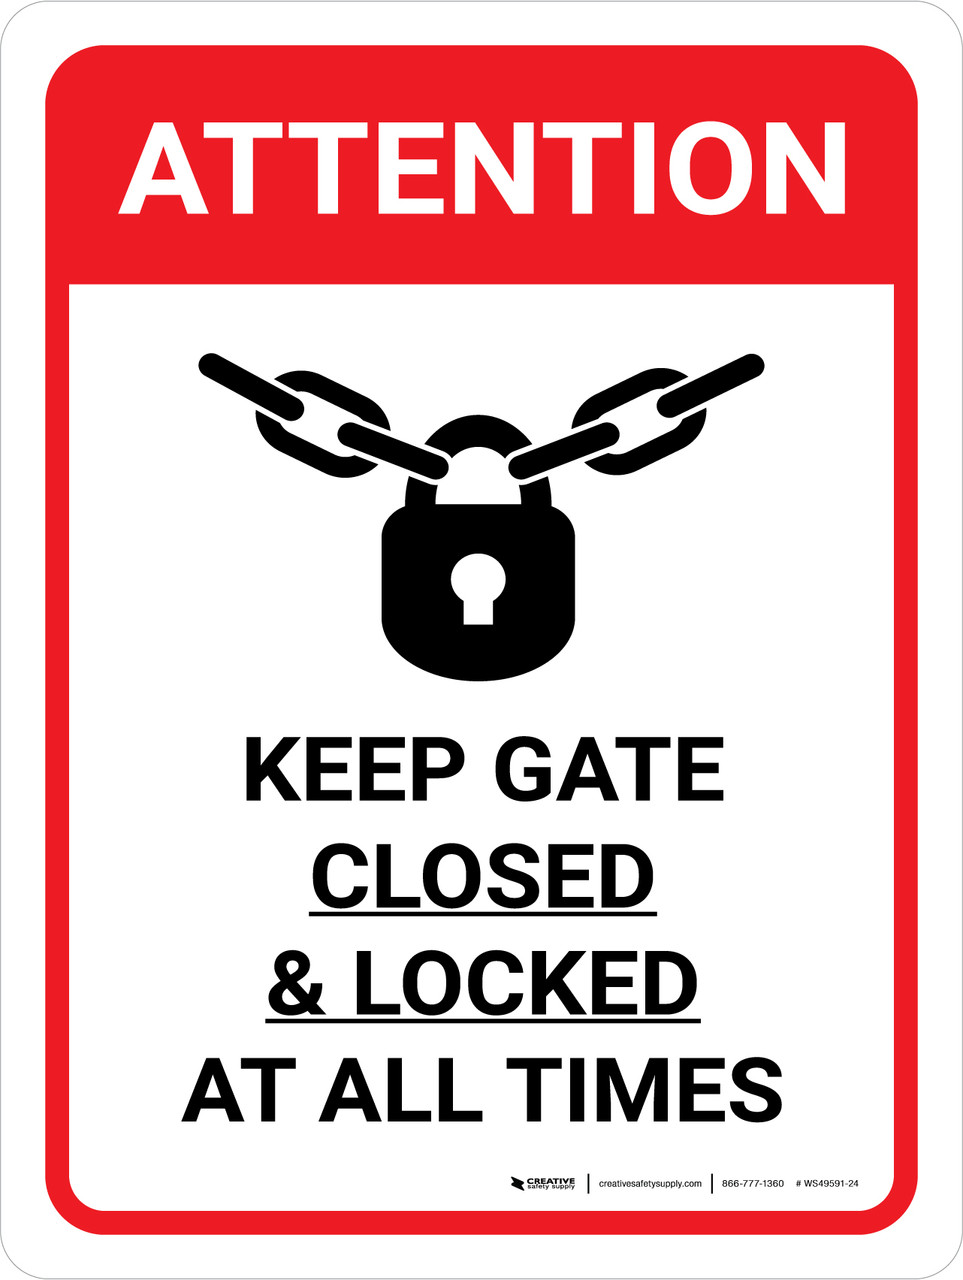 Keep Gate Closed All Times Sign Stock Photo 119357